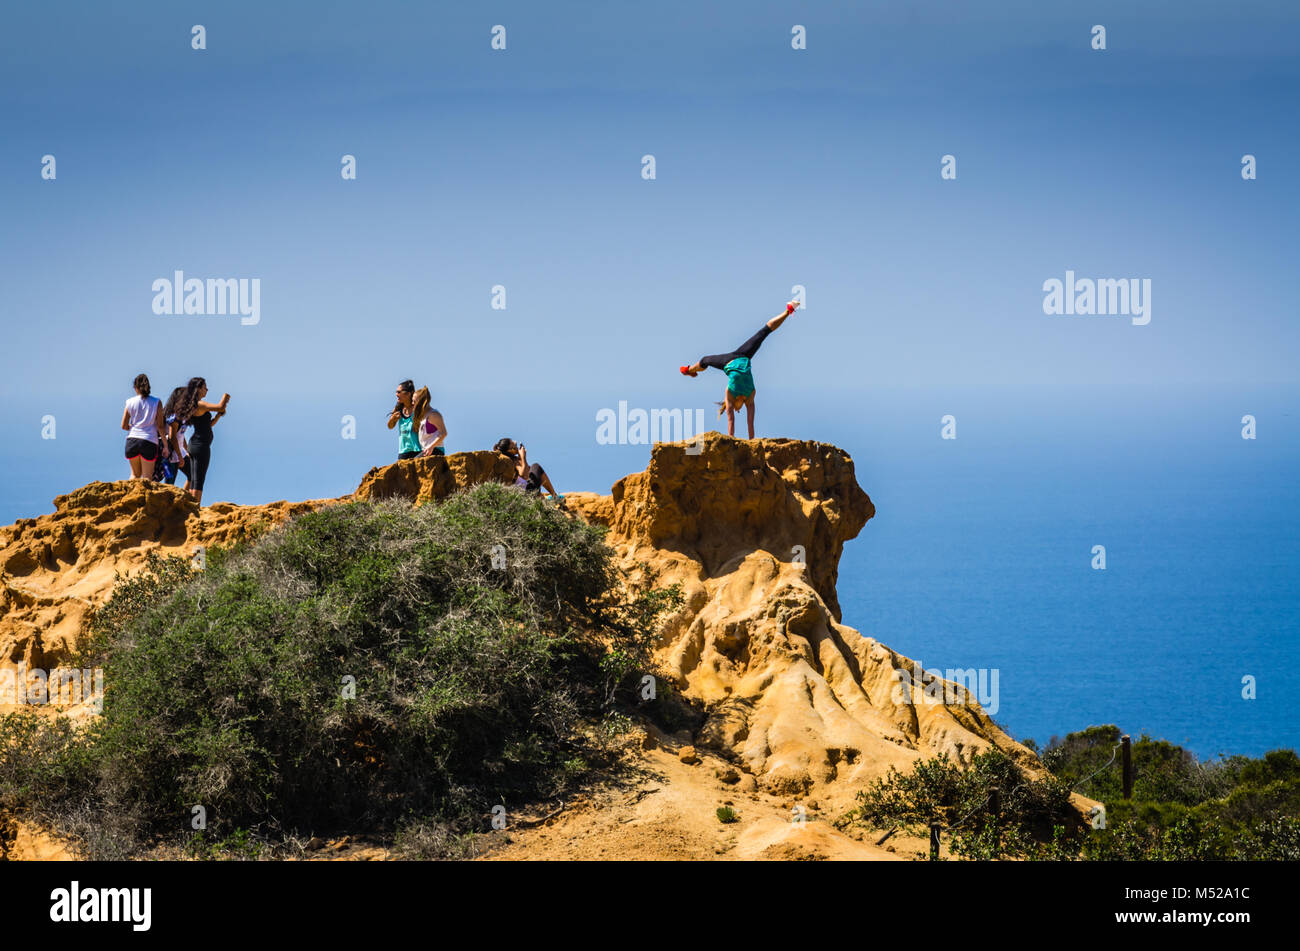 Woman strikes a handstand yoga pose for a photograph on a cliff at Torrey Pines State Natural Reserve, near San Diego, California. Stock Photo